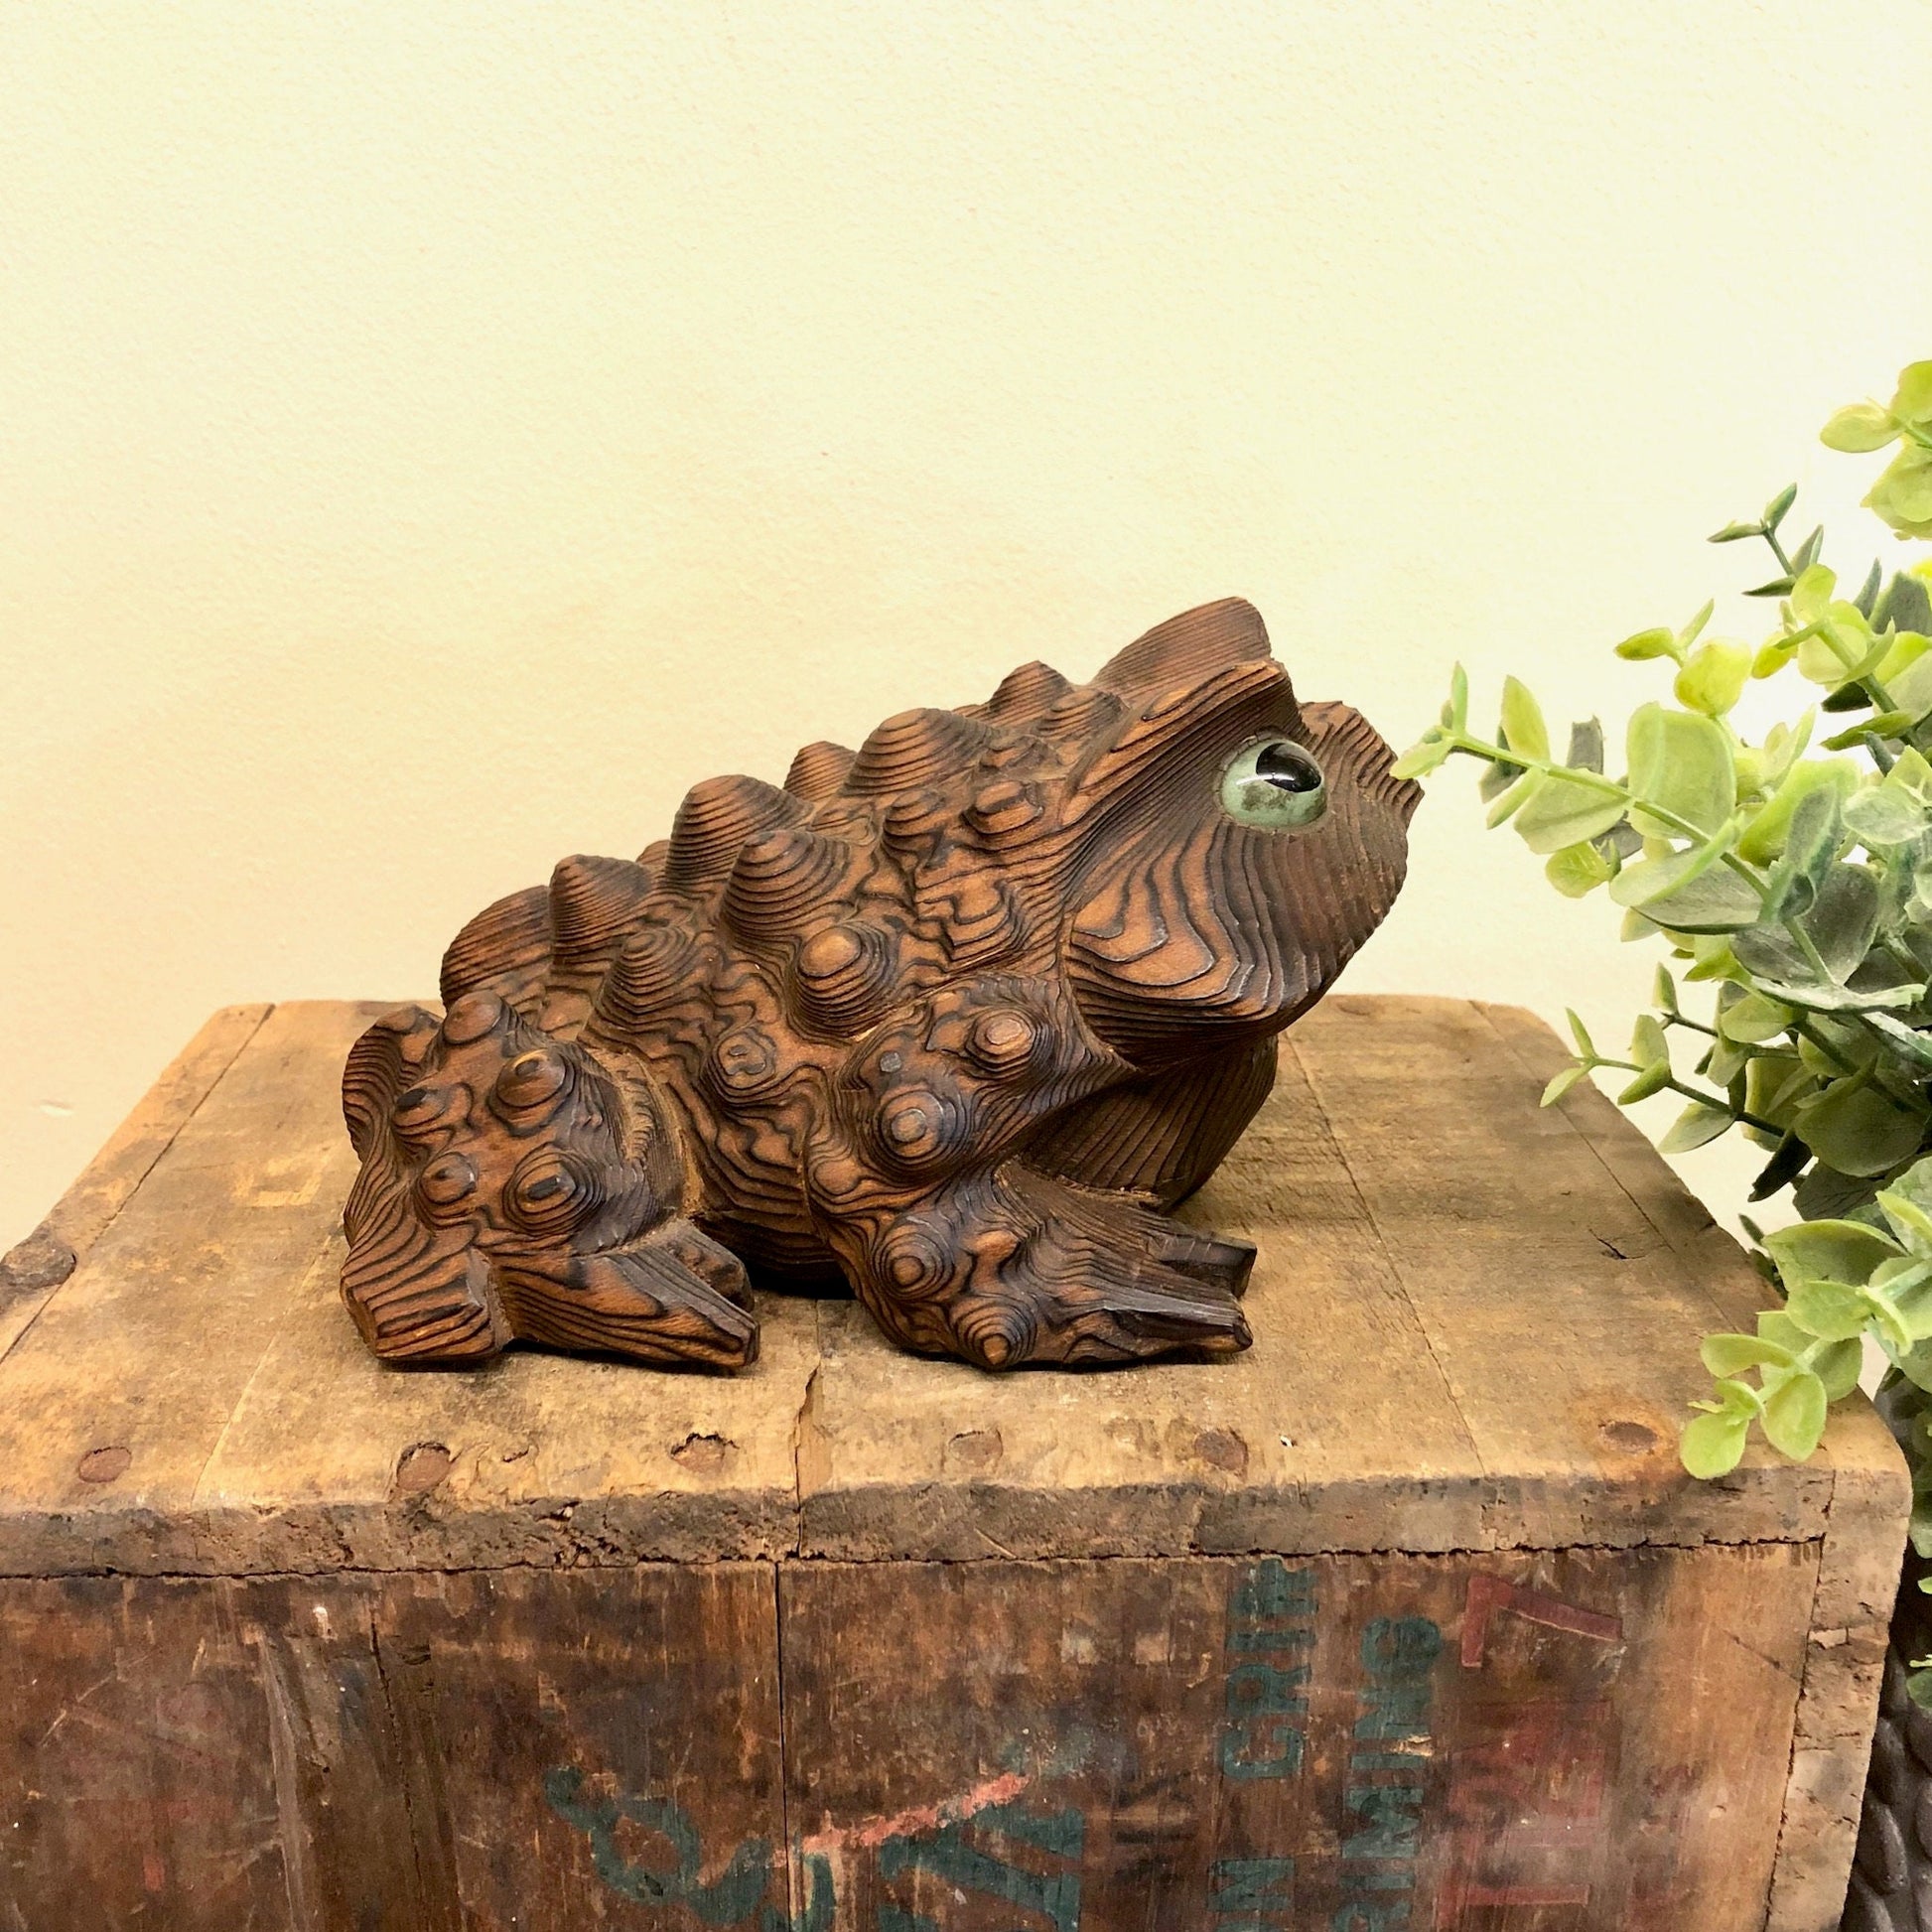 Vintage hand carved wooden frog figurine sculpture for rustic animal home decor, sitting on distressed wooden surface with greenery in background